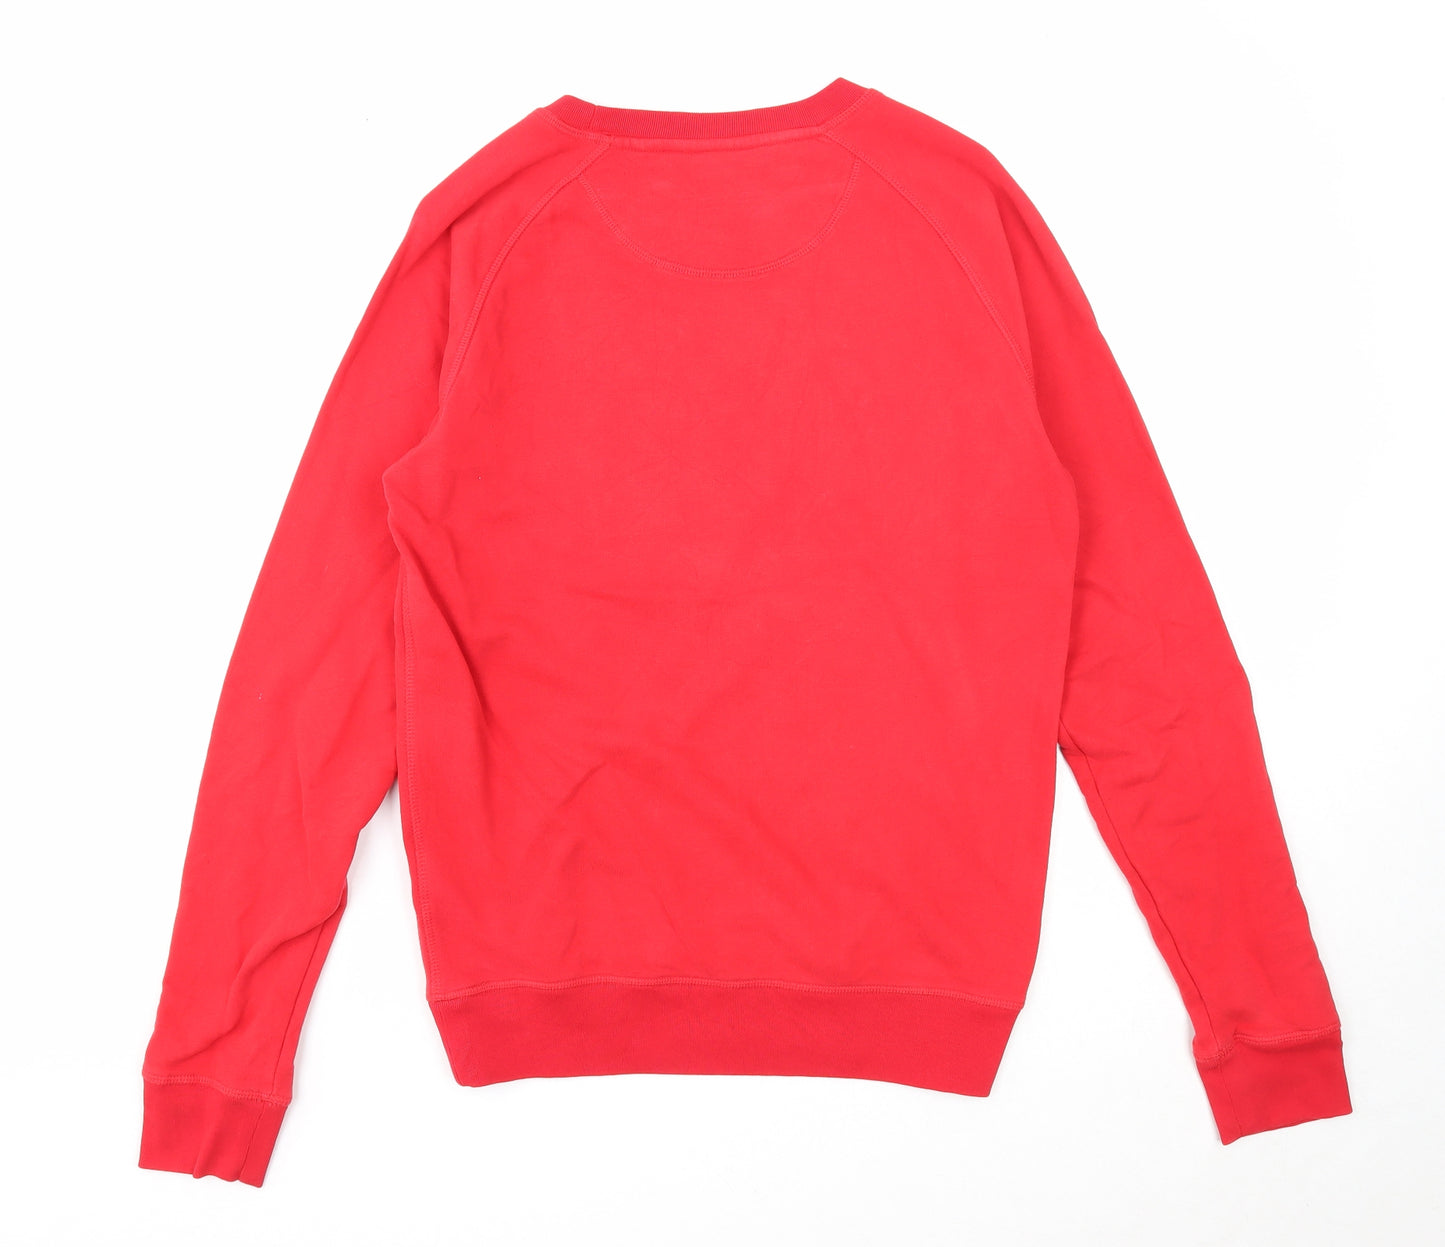 Stanley Stella Mens Red Cotton Pullover Sweatshirt Size S - Christmas Story